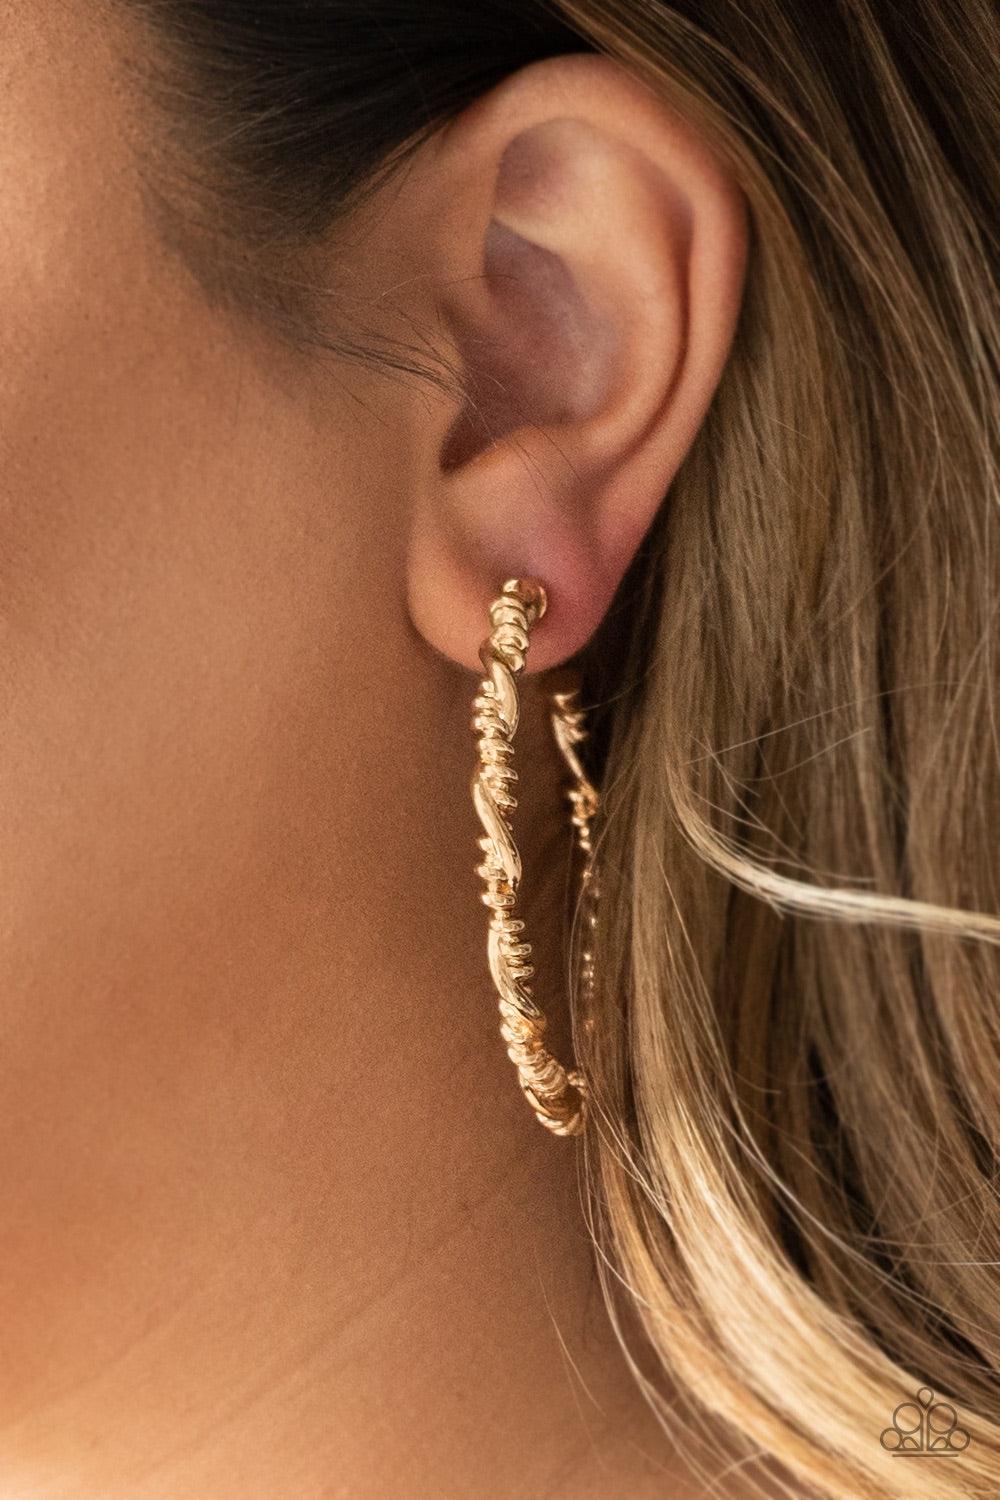 Paparazzi Accessories Street Mod - Gold Glistening gold bars wrap into an edgy twisted hoop for a casual look. Earring attaches to a standard post fitting. Hoop measures 2" in diameter. Jewelry